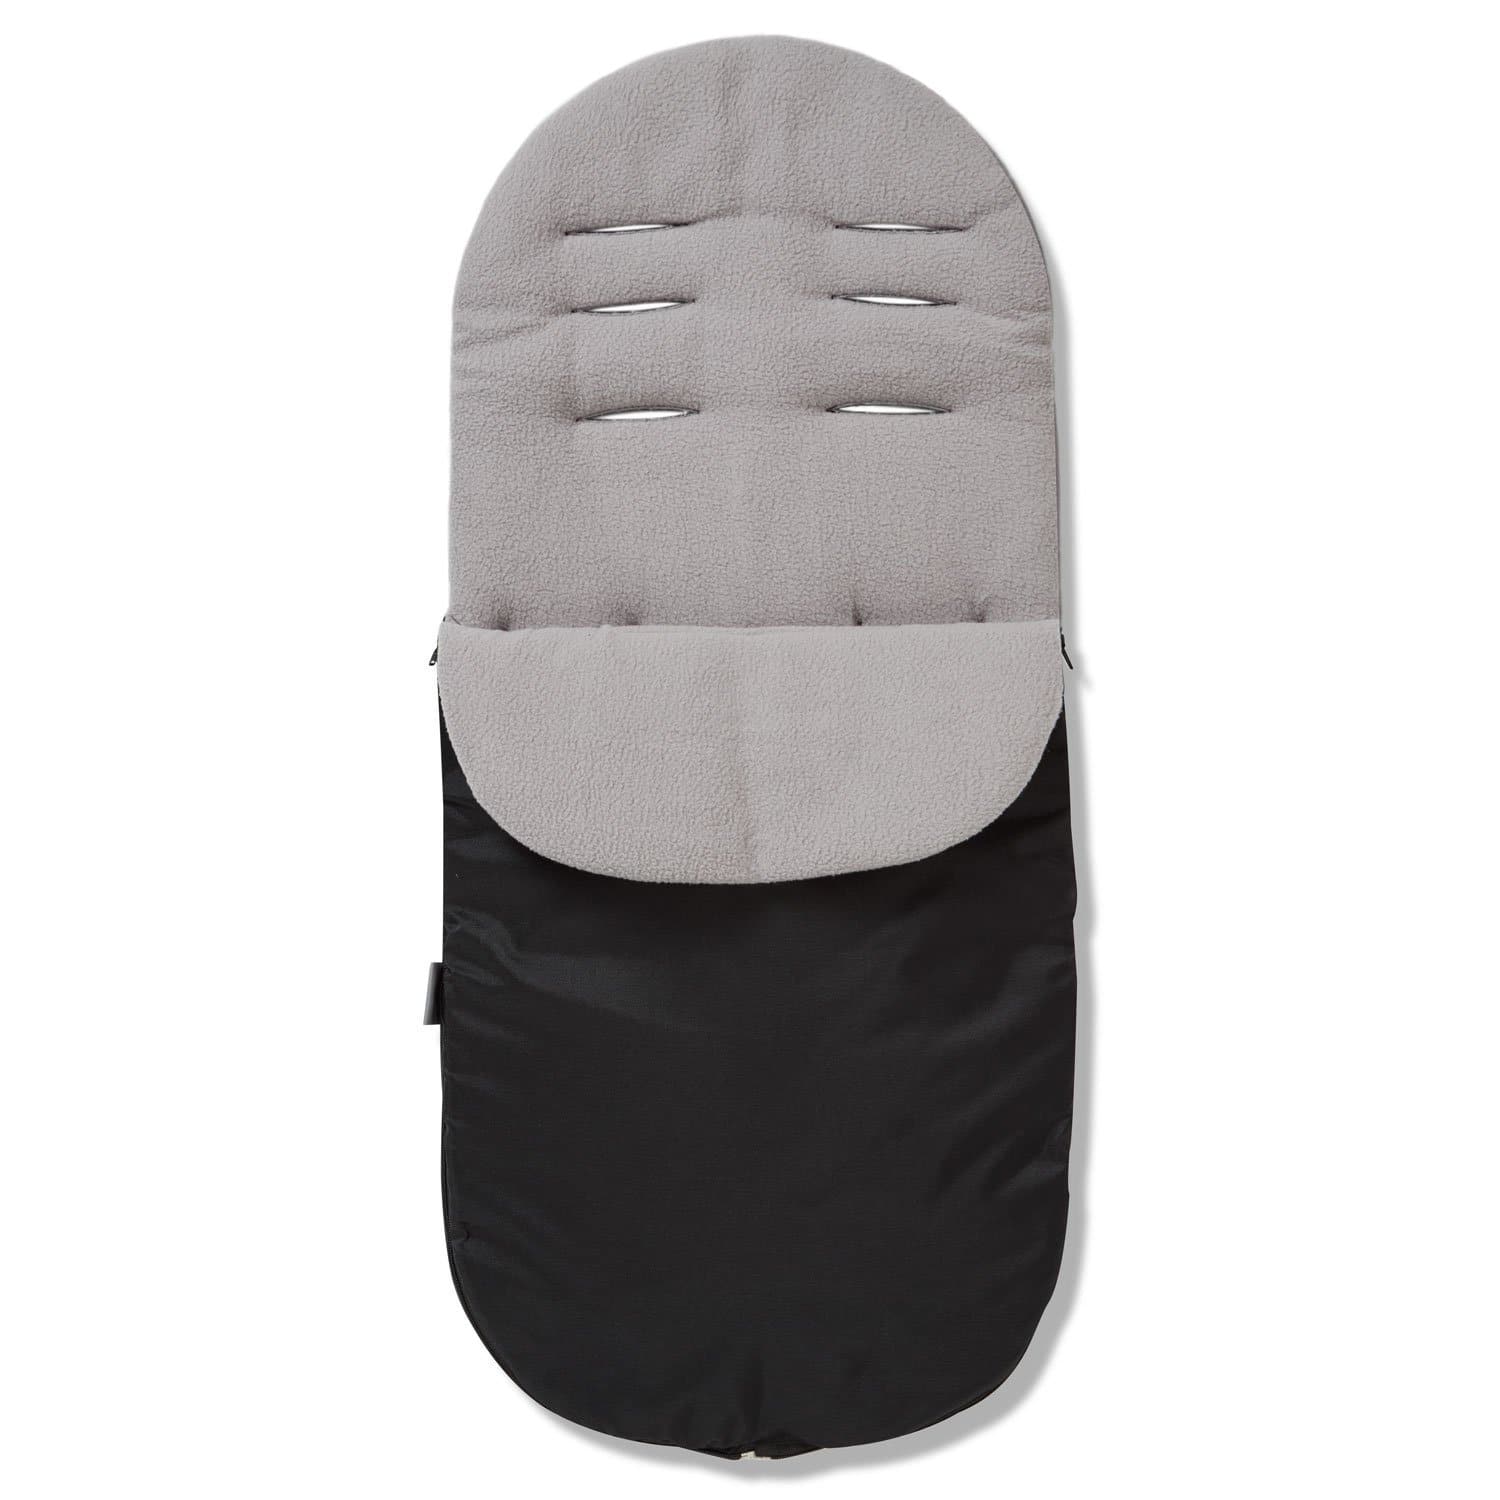 Footmuff / Cosy Toes Compatible with Zeta - Grey / Fits All Models | For Your Little One